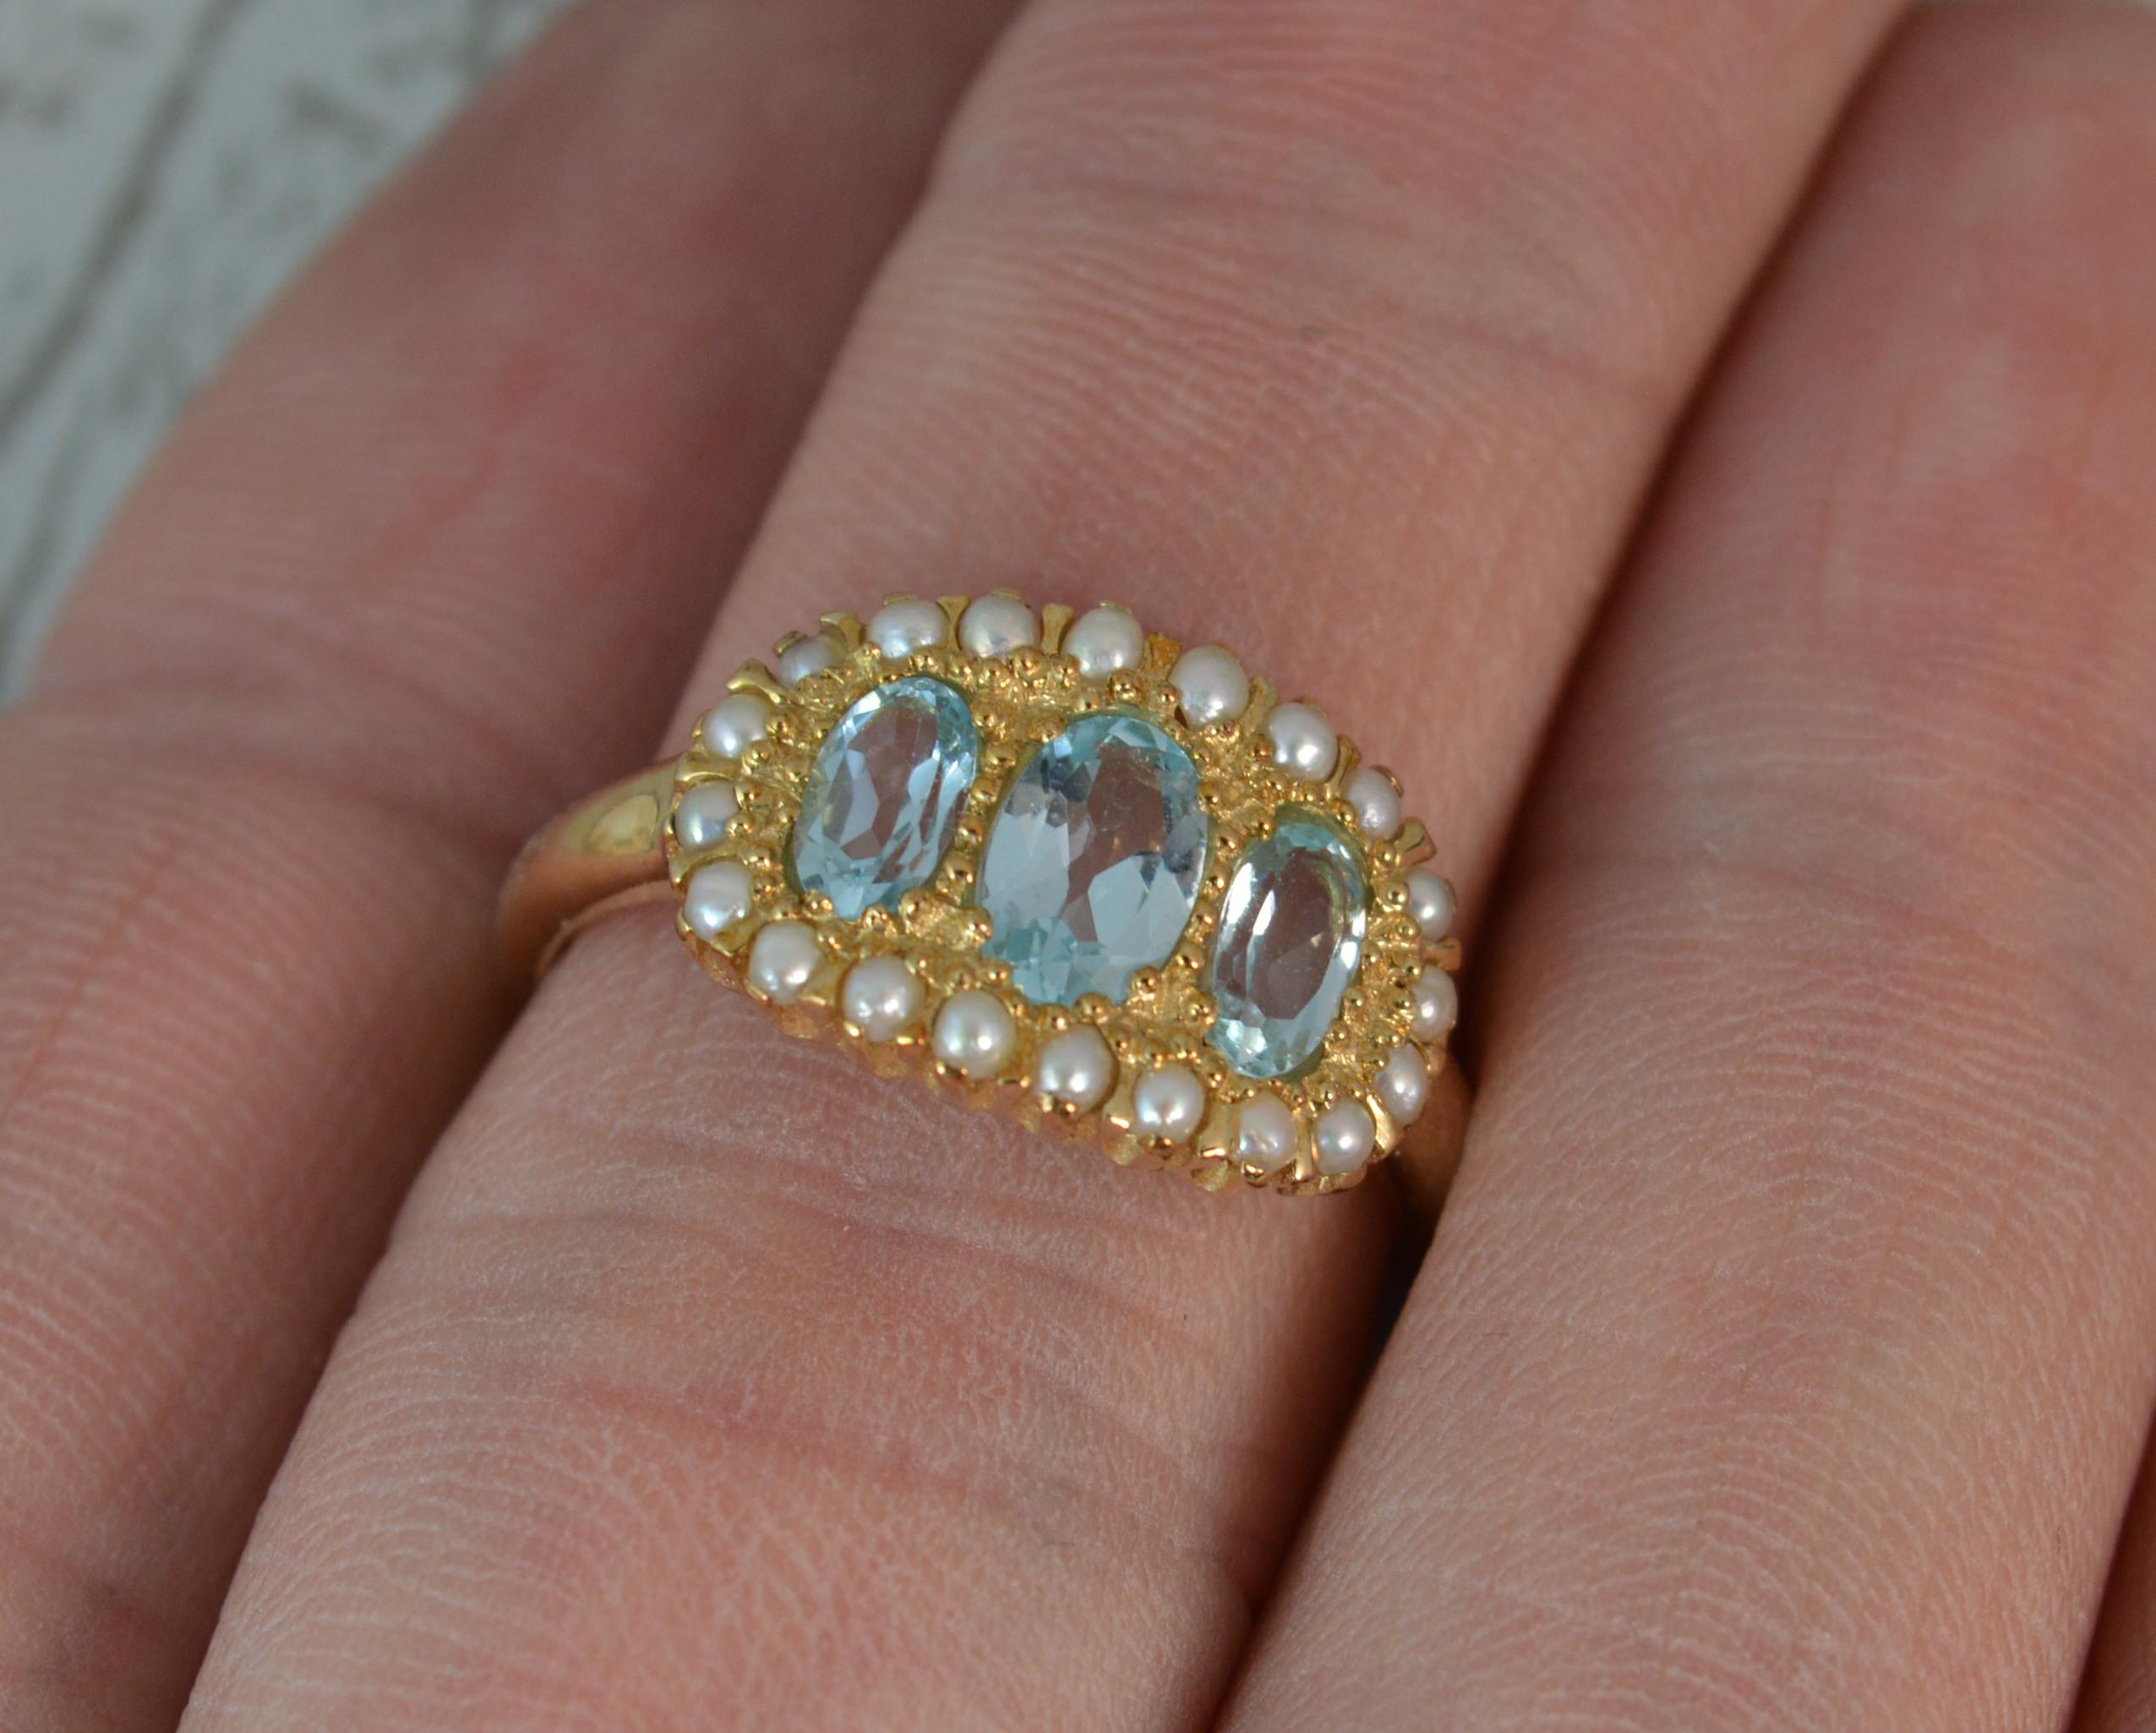 A LUKE STOCKLEY Designer ring. Solid 9 carat yellow gold example. 
Size ; N UK, 6 1/2 US
Three oval cut aquamarine stones with full surround of seed pearls.
15mm x 10mm cluster head.

Condition ; Excellent. Clean, solid shank. Well set stones.